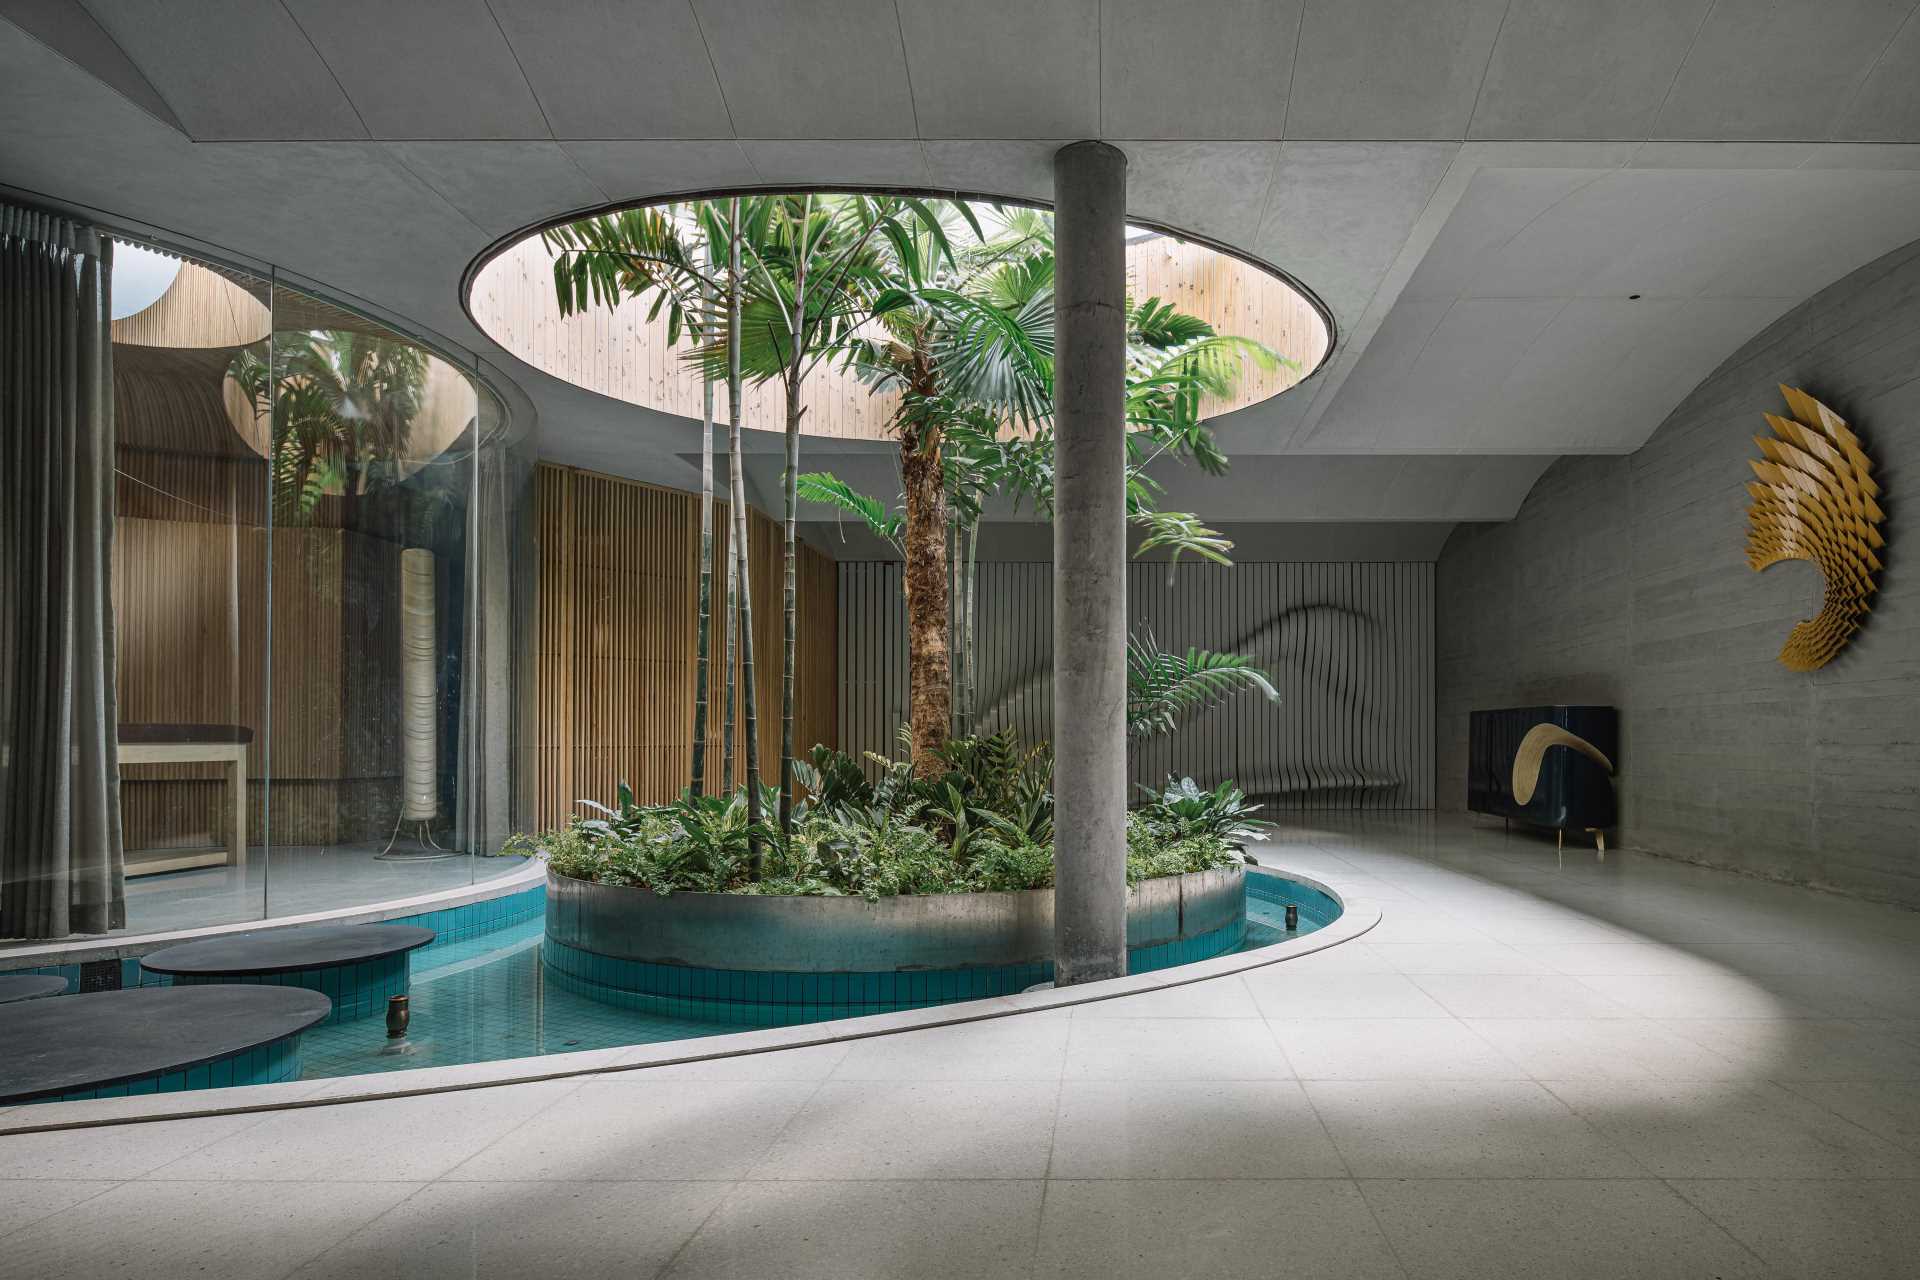 A quiet area of this modern home includes a massage room, a water feature with a garden island, and a sculptural wall.